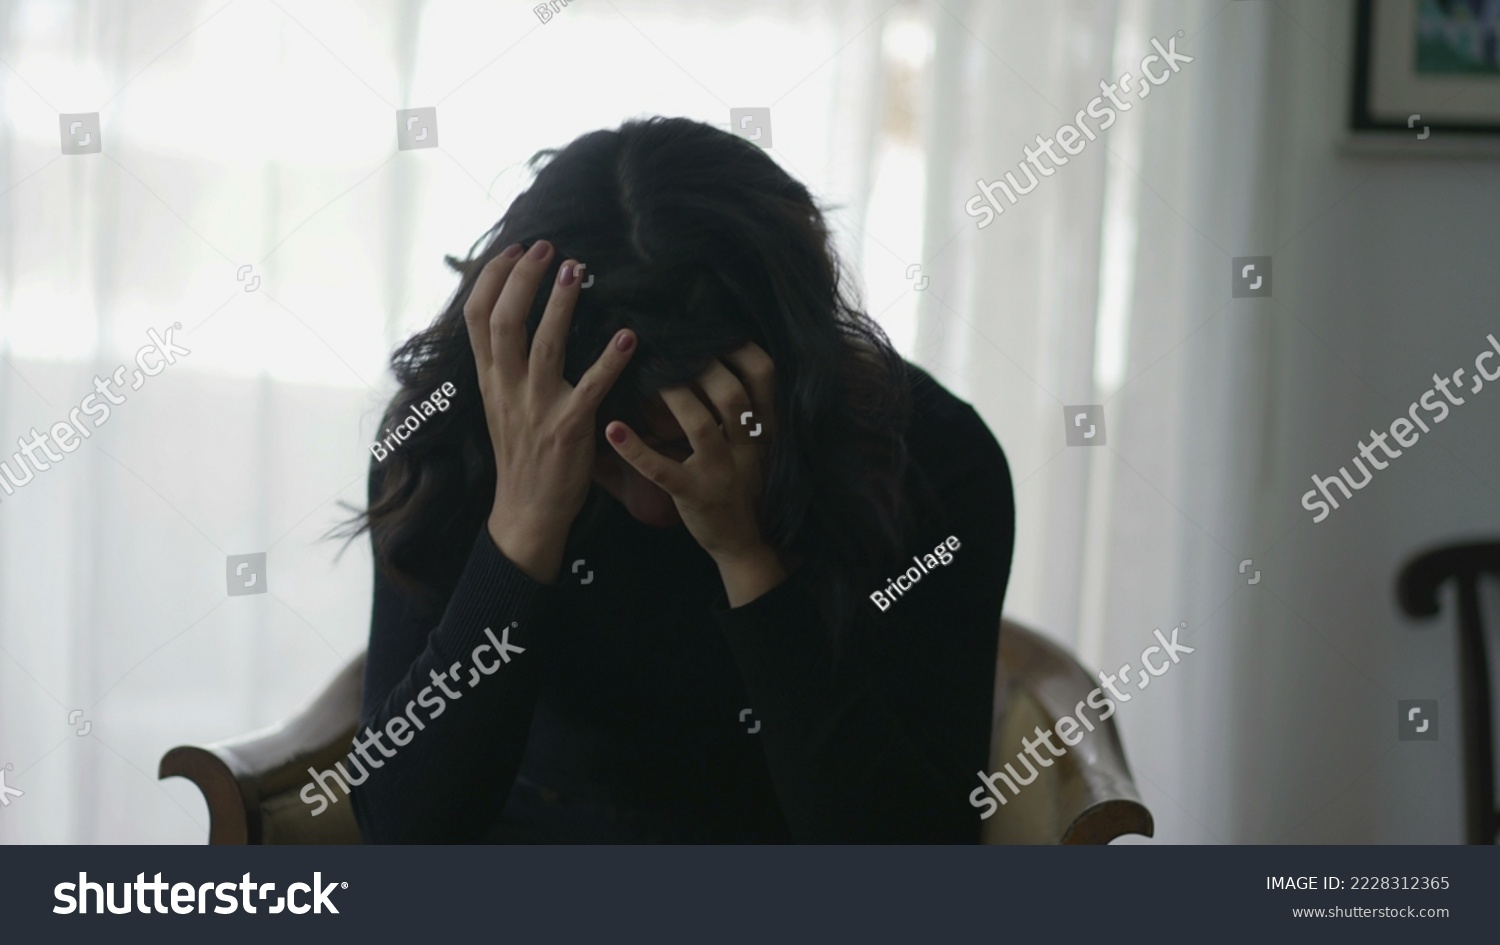 Woman covering face in shame suffering from emotional pain #2228312365